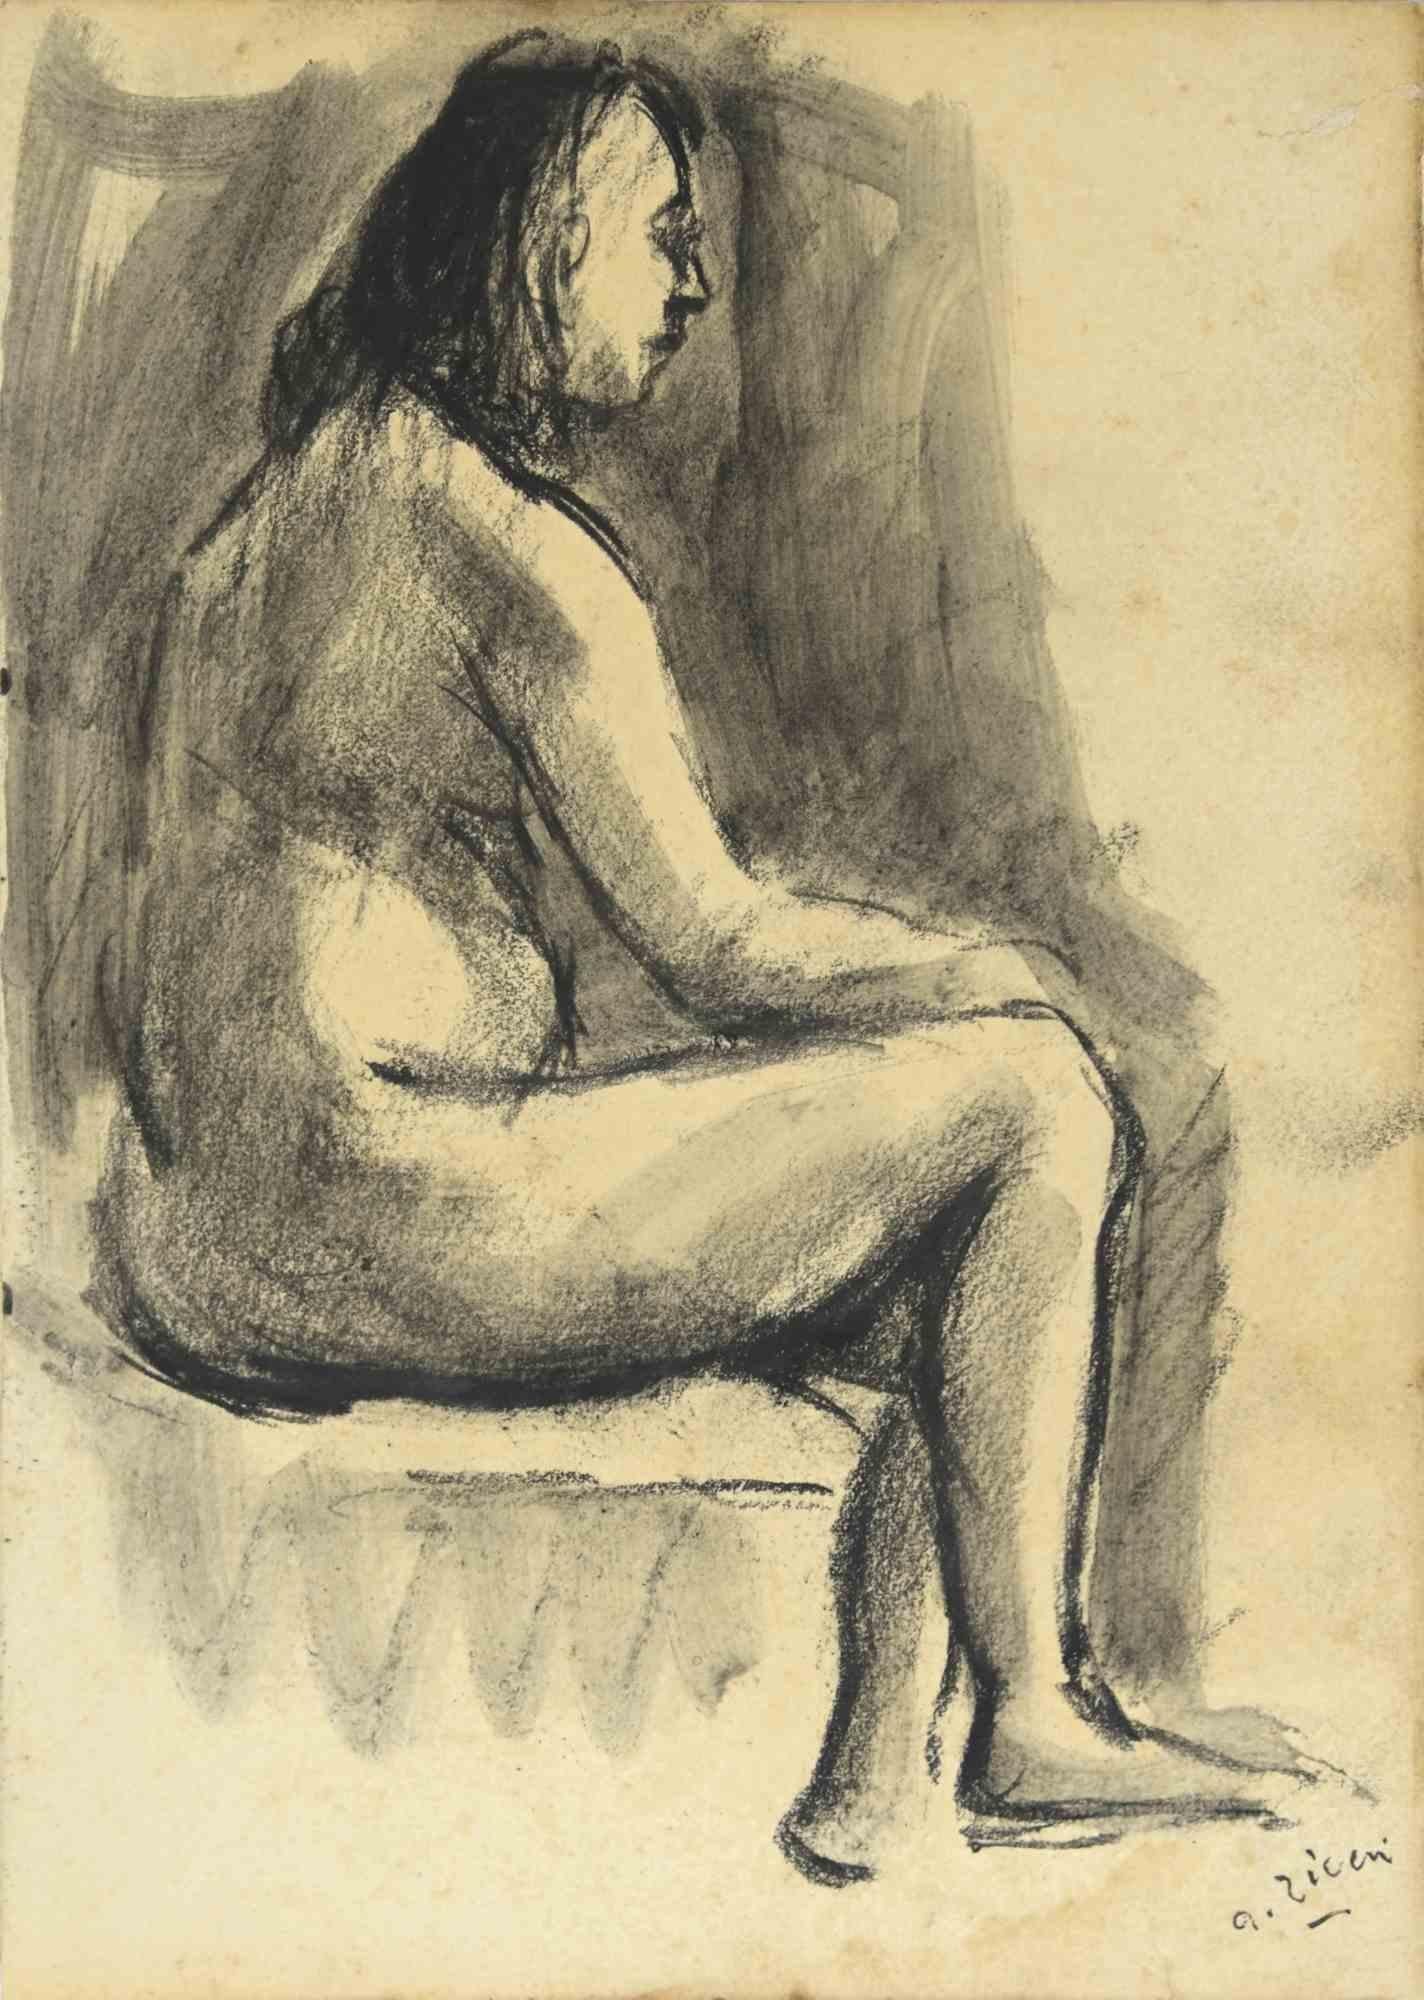 The Nude is a drawing realized by Alberto Ziveri in the 1930s.

Ink and watercolor on paper.

Hand-signed.

In good condition.

The artwork is represented through deft strokes masterly.

Alberto Ziveri (Rome,1908 – 1990), the Italian painter of the